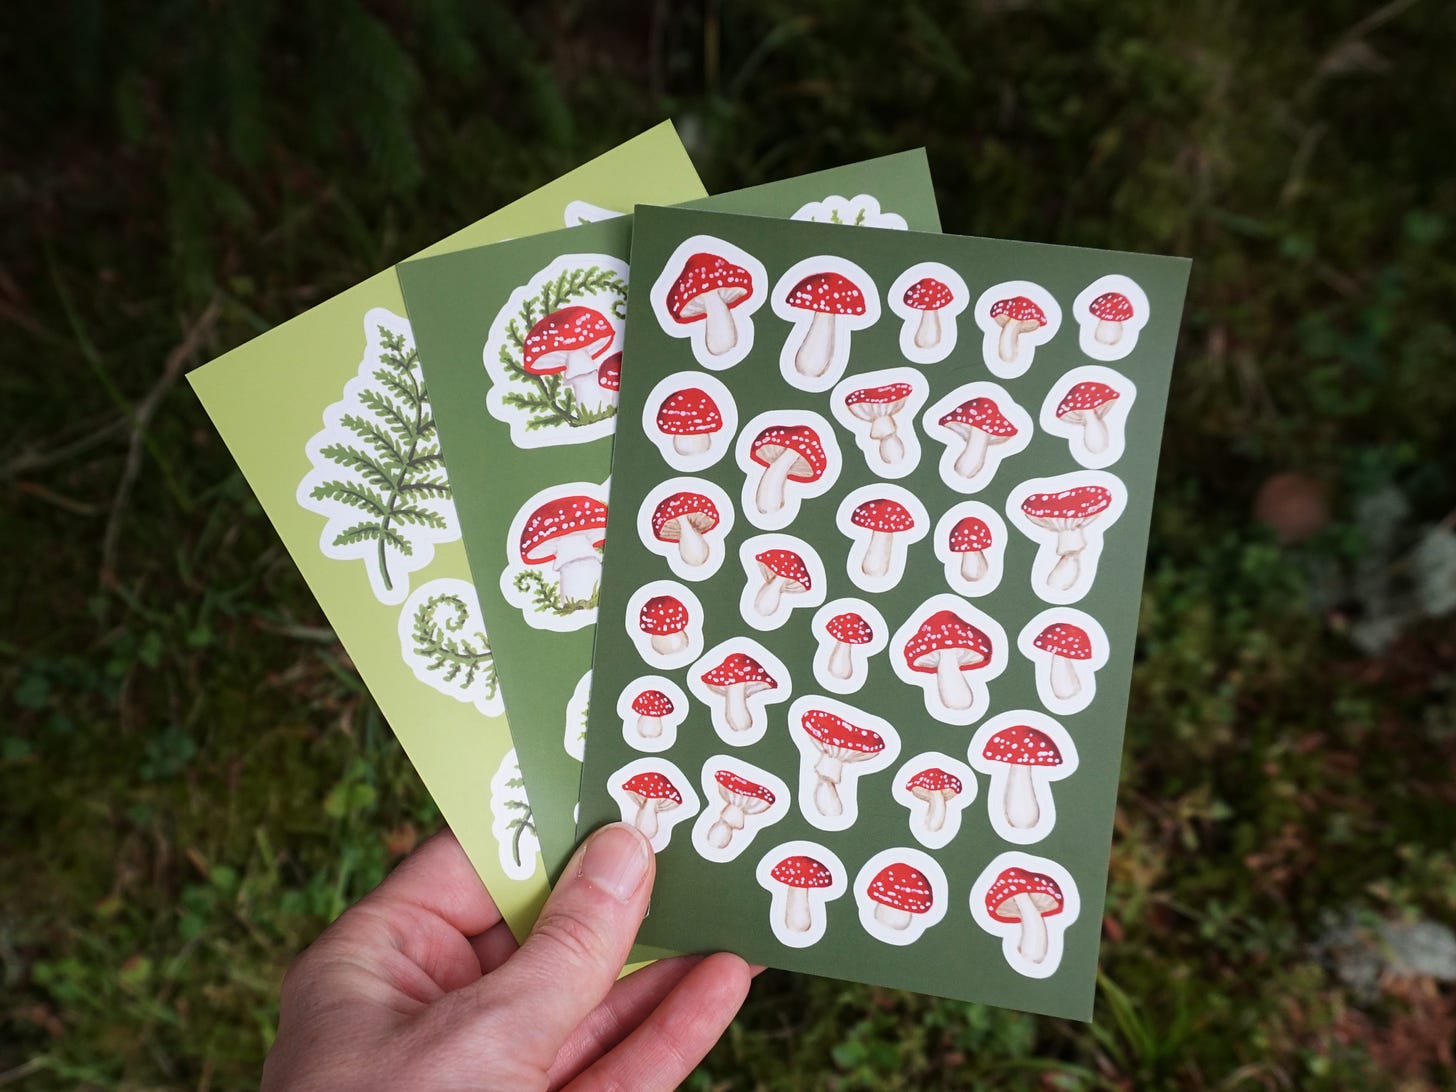 A white person's hand holds a fan of three sticker sheets. The first has a green background with dancing red and white mushrooms. The second has a lighter green background, and some larger mushrooms framed by moss and bracken. The final sheet is light green with fronds of bracken.